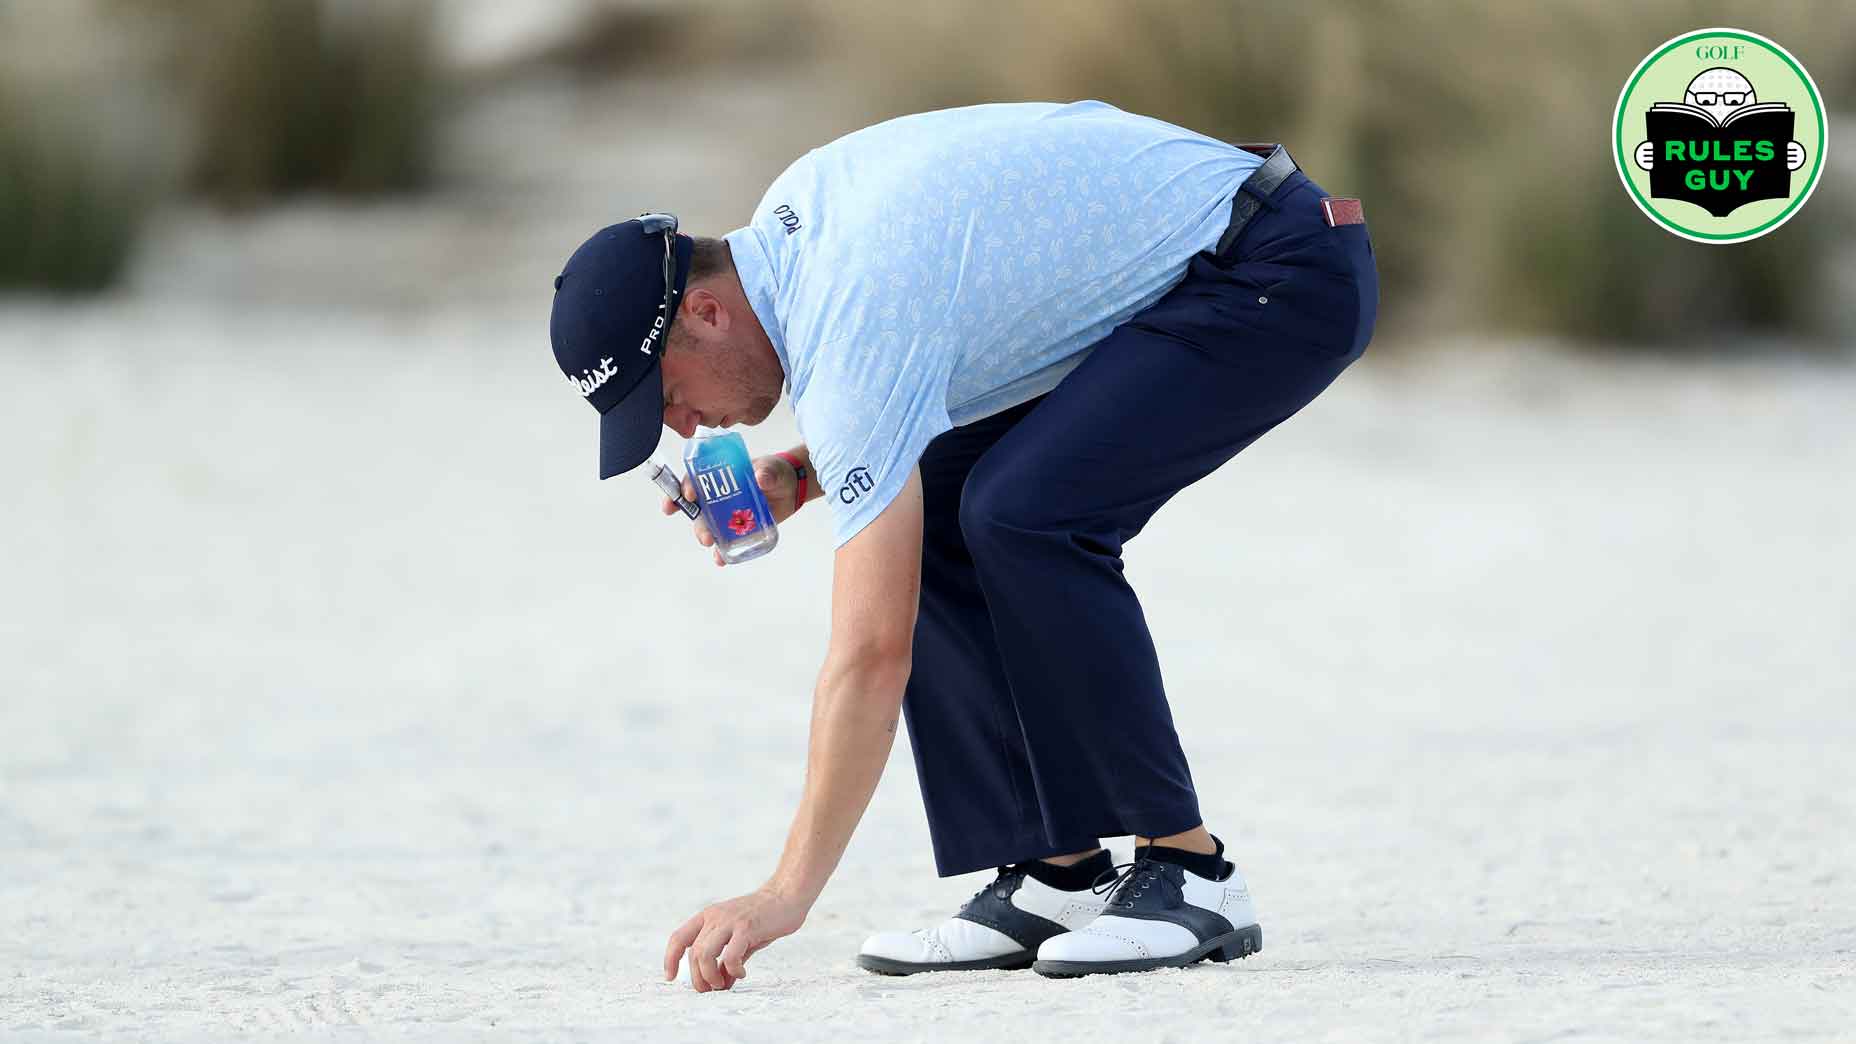 Justin Thomas of the United States removes a loose impediment before he plays his second shot on the 16th hole during the second round of the 2018 Hero World Challenge at Albany Bahamas on November 30, 2018 in Nassau, Bahamas.